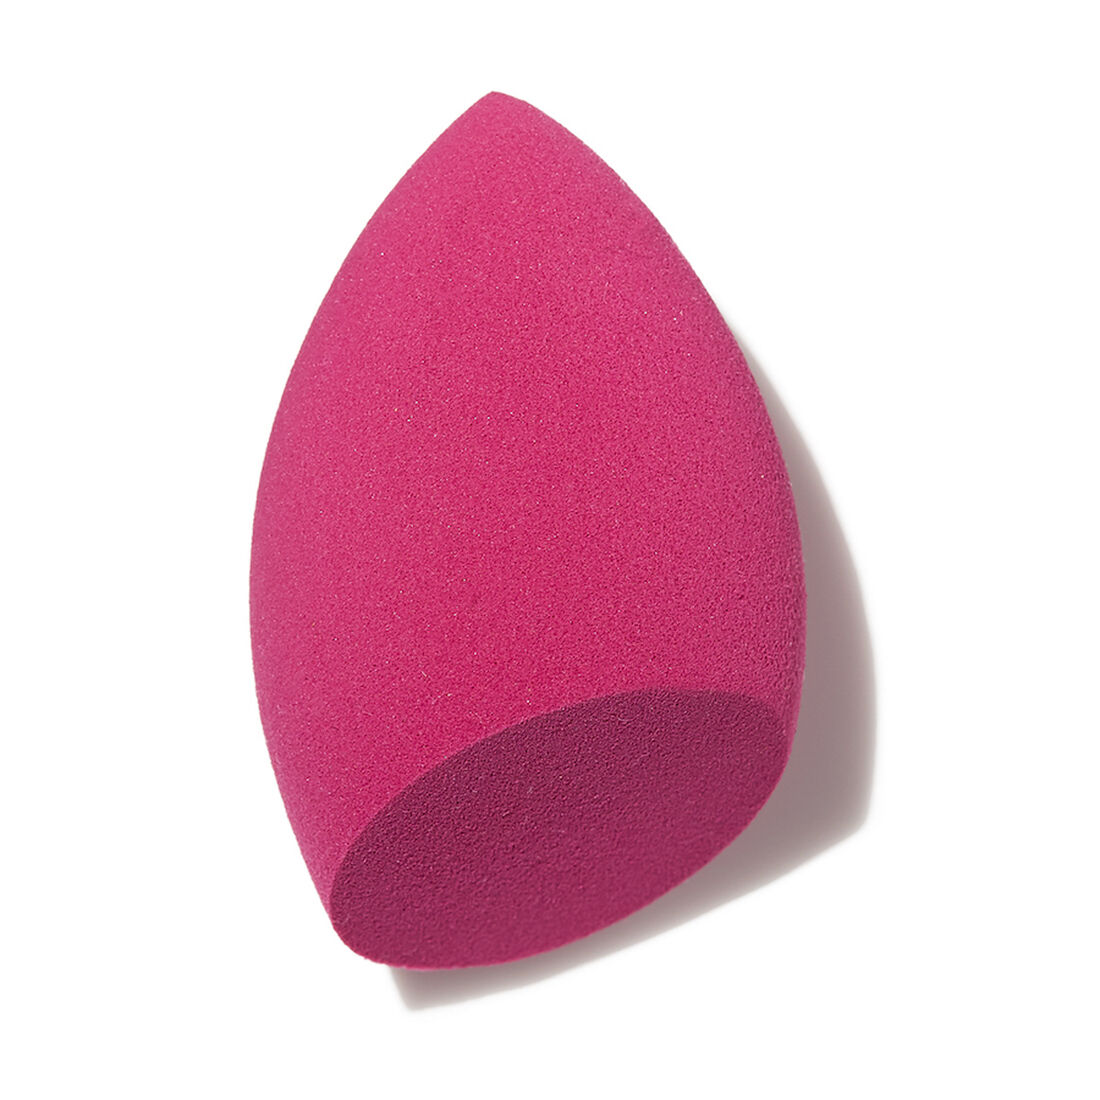 Beautyblender Dupes That Look and Feel Similar to the Original